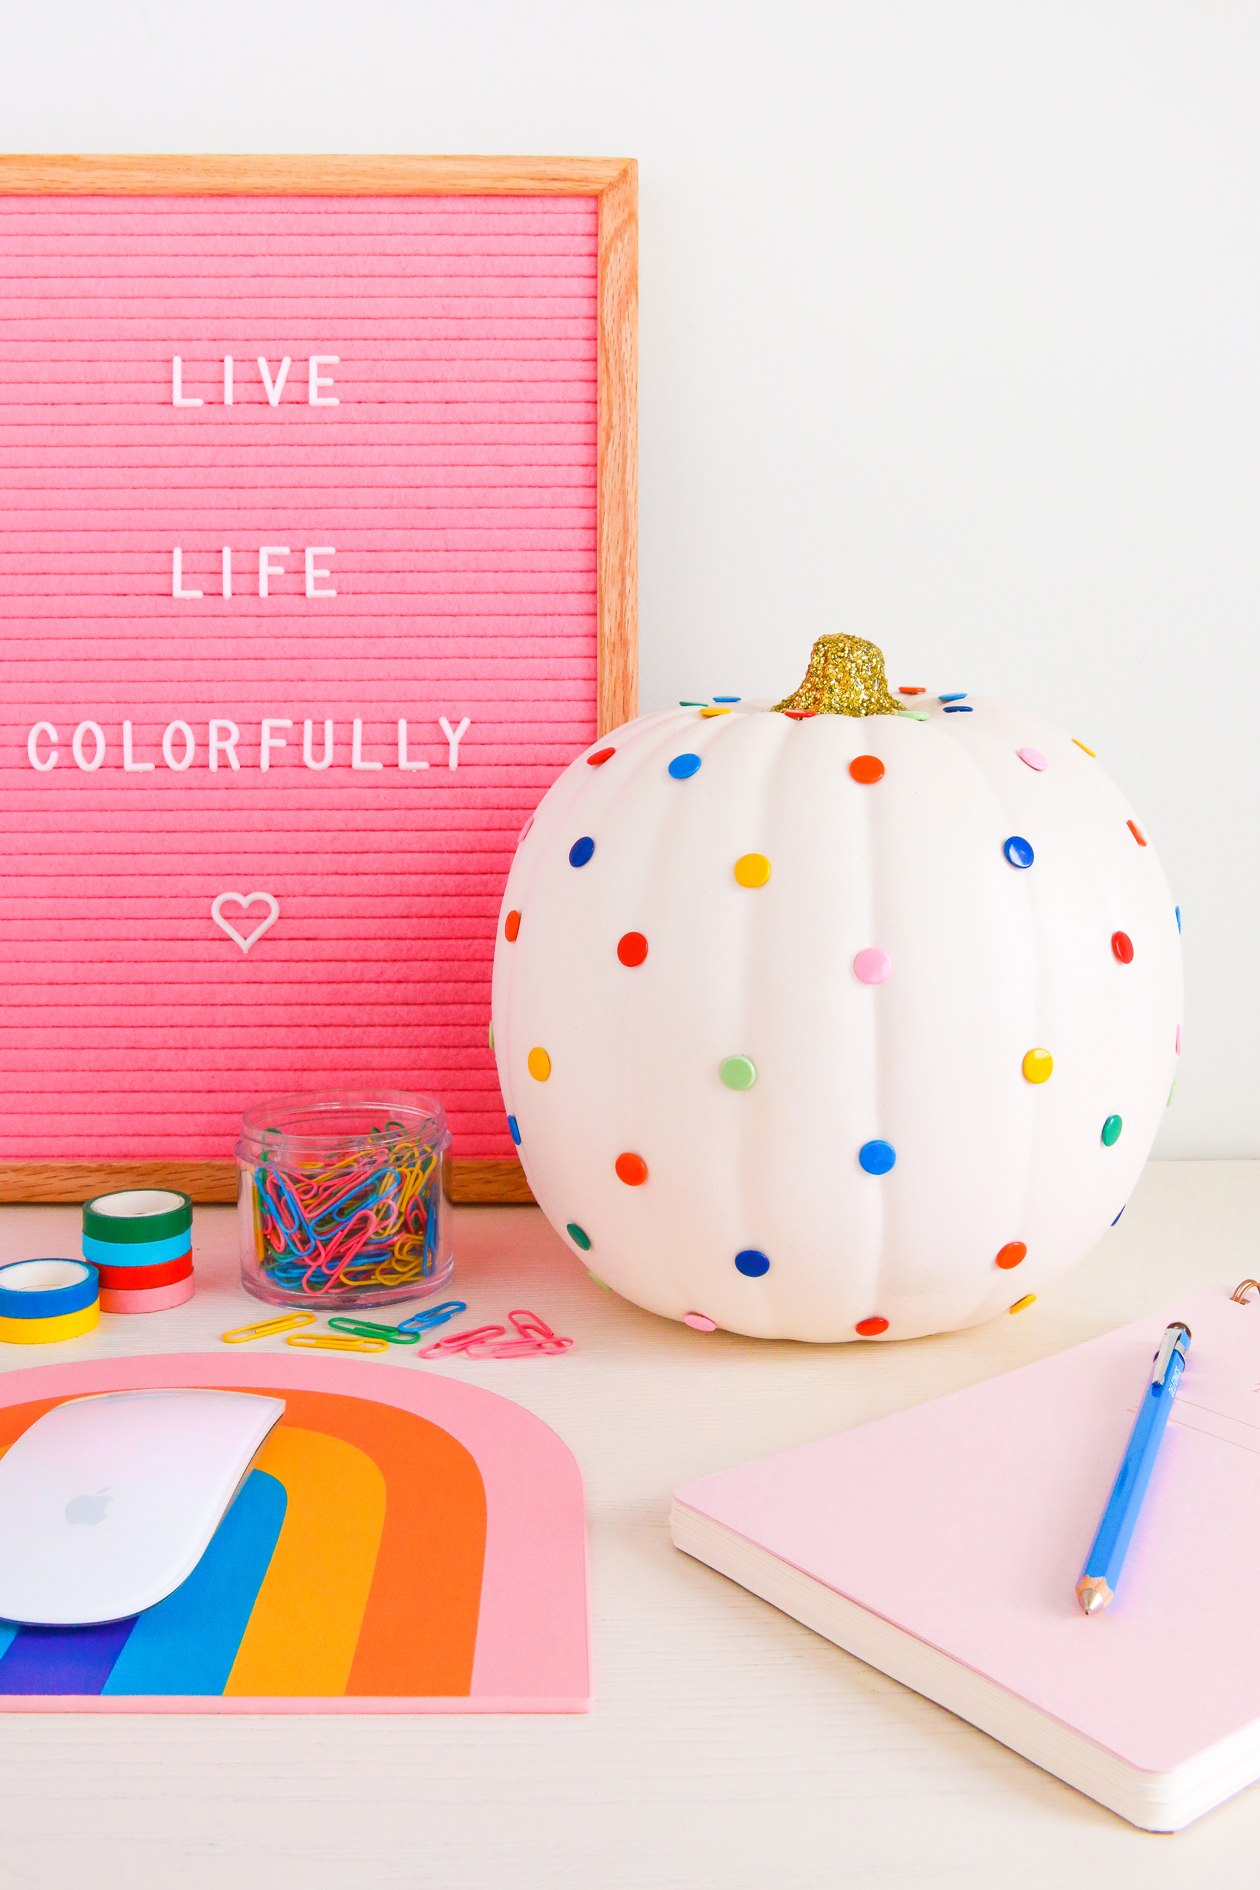 Looking for ways to decorate pumpkins for Halloween or fall? Make this DIY Push Pin Pumpkin in a few minutes! It's cute, colorful, functional, and perfect for Halloween!